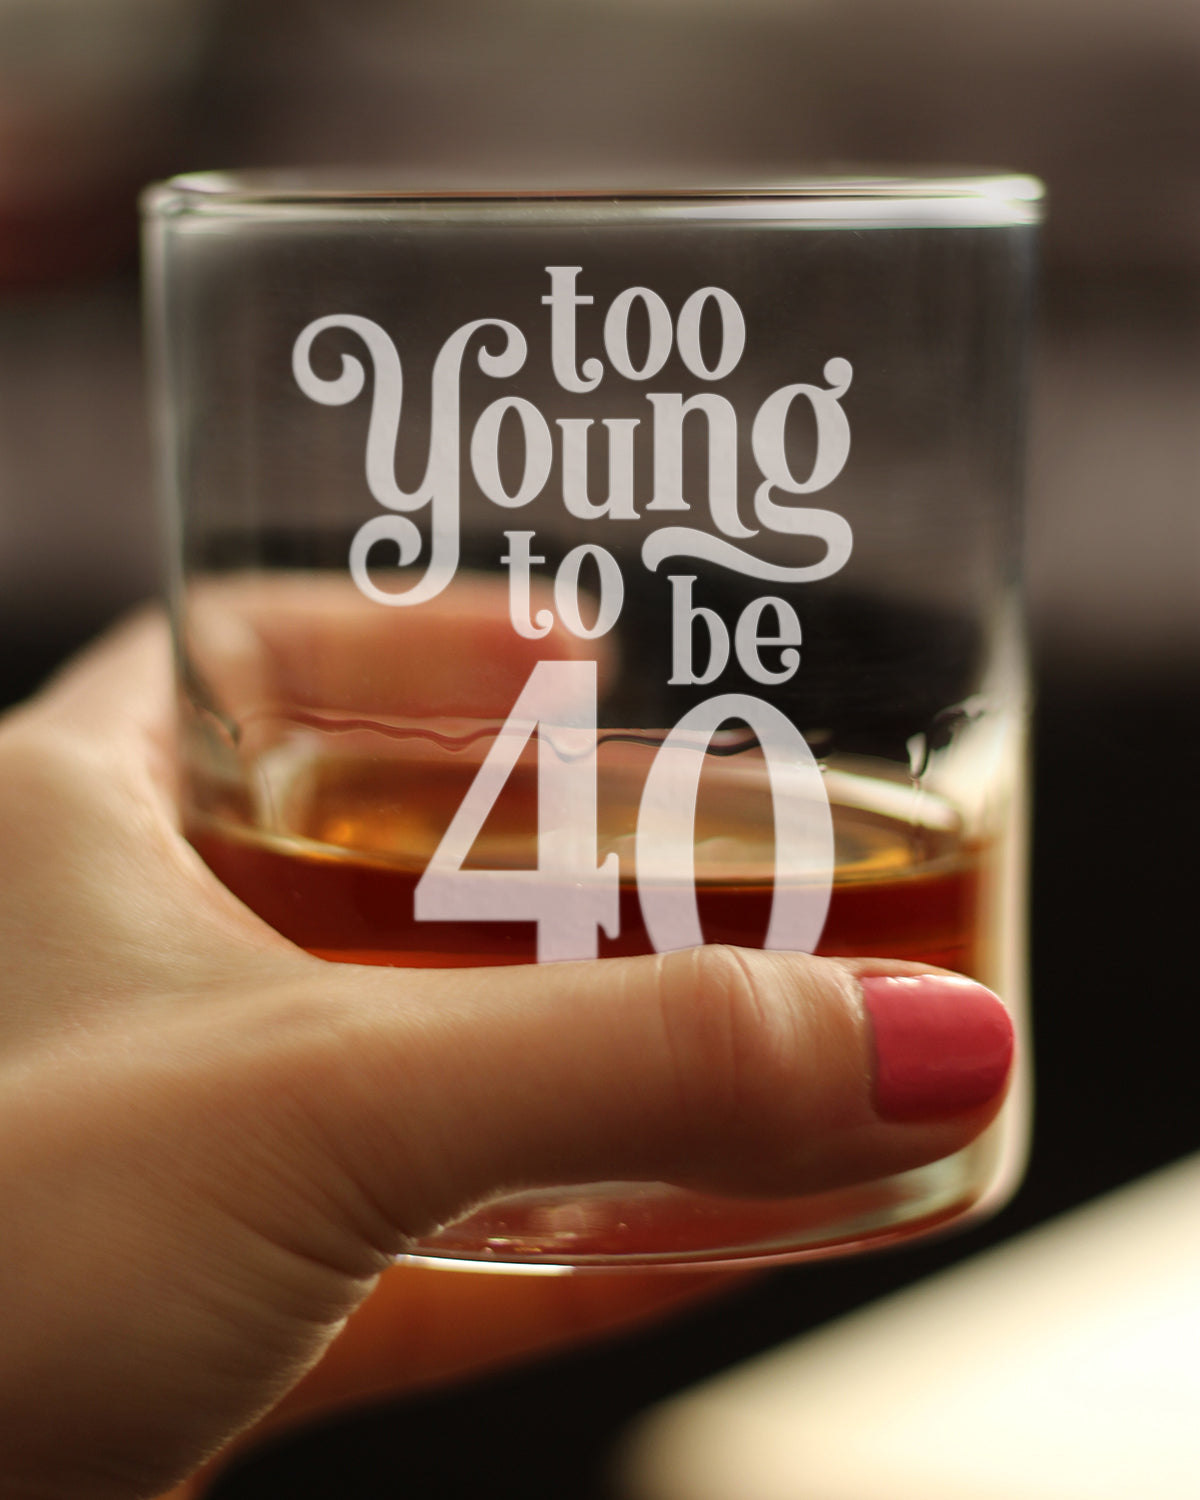 Too Young to be 40 - Funny 40th Birthday Whiskey Rocks Glass Gifts for Men &amp; Women Turning 40 - Fun Whisky Tumbler